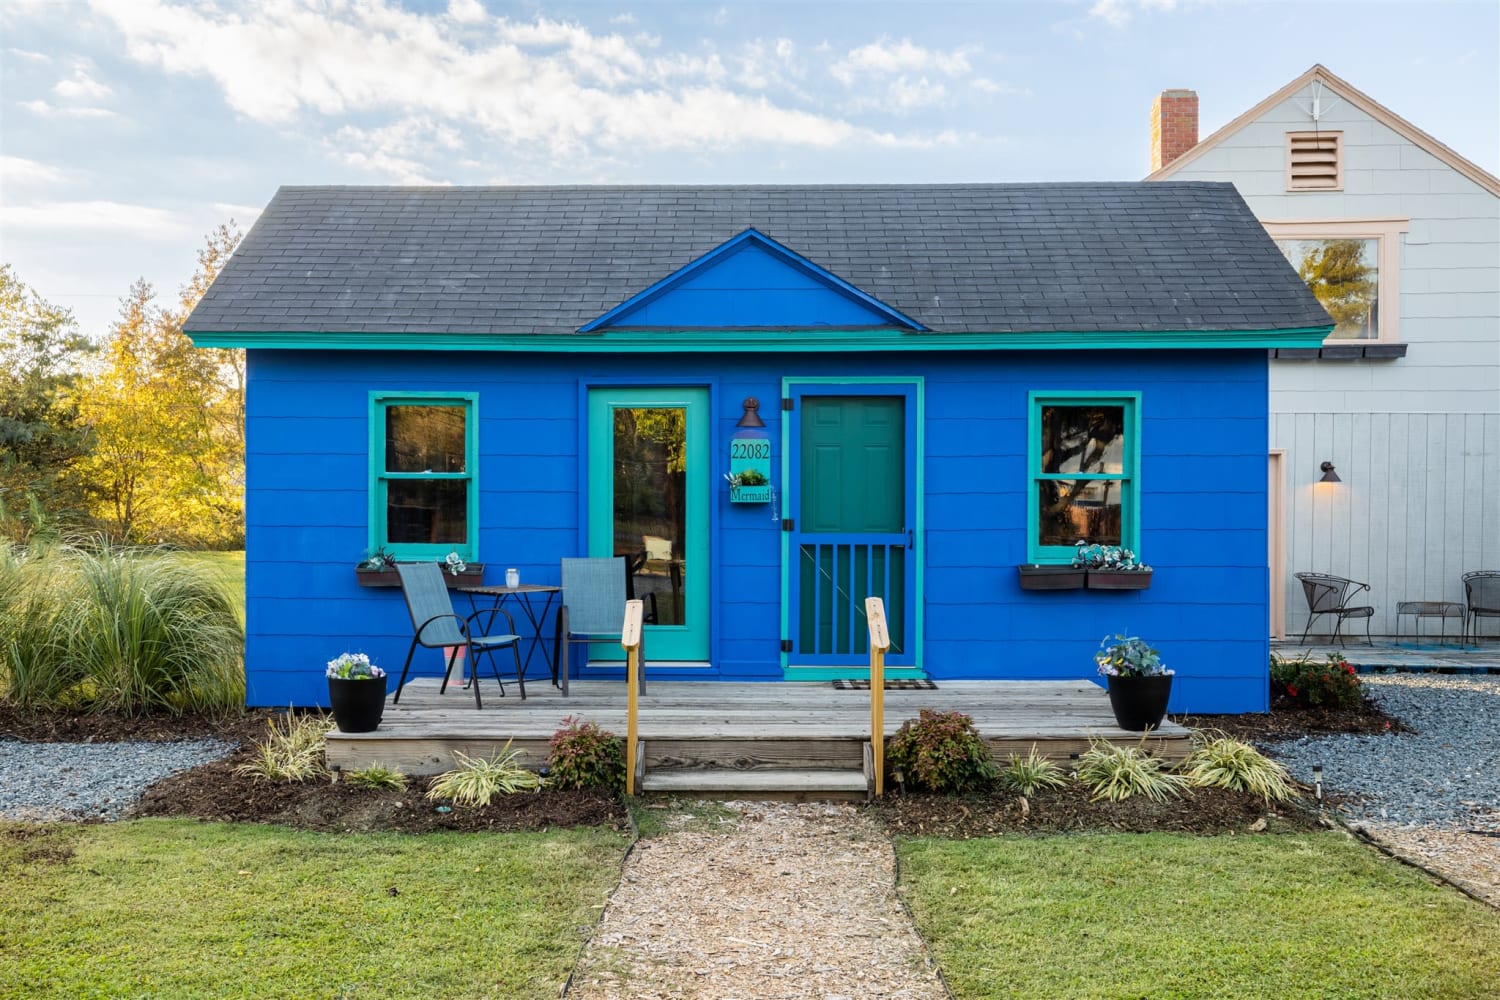 A bright blue tiny home with turqouise trim and a small front porch and flower planters out front.